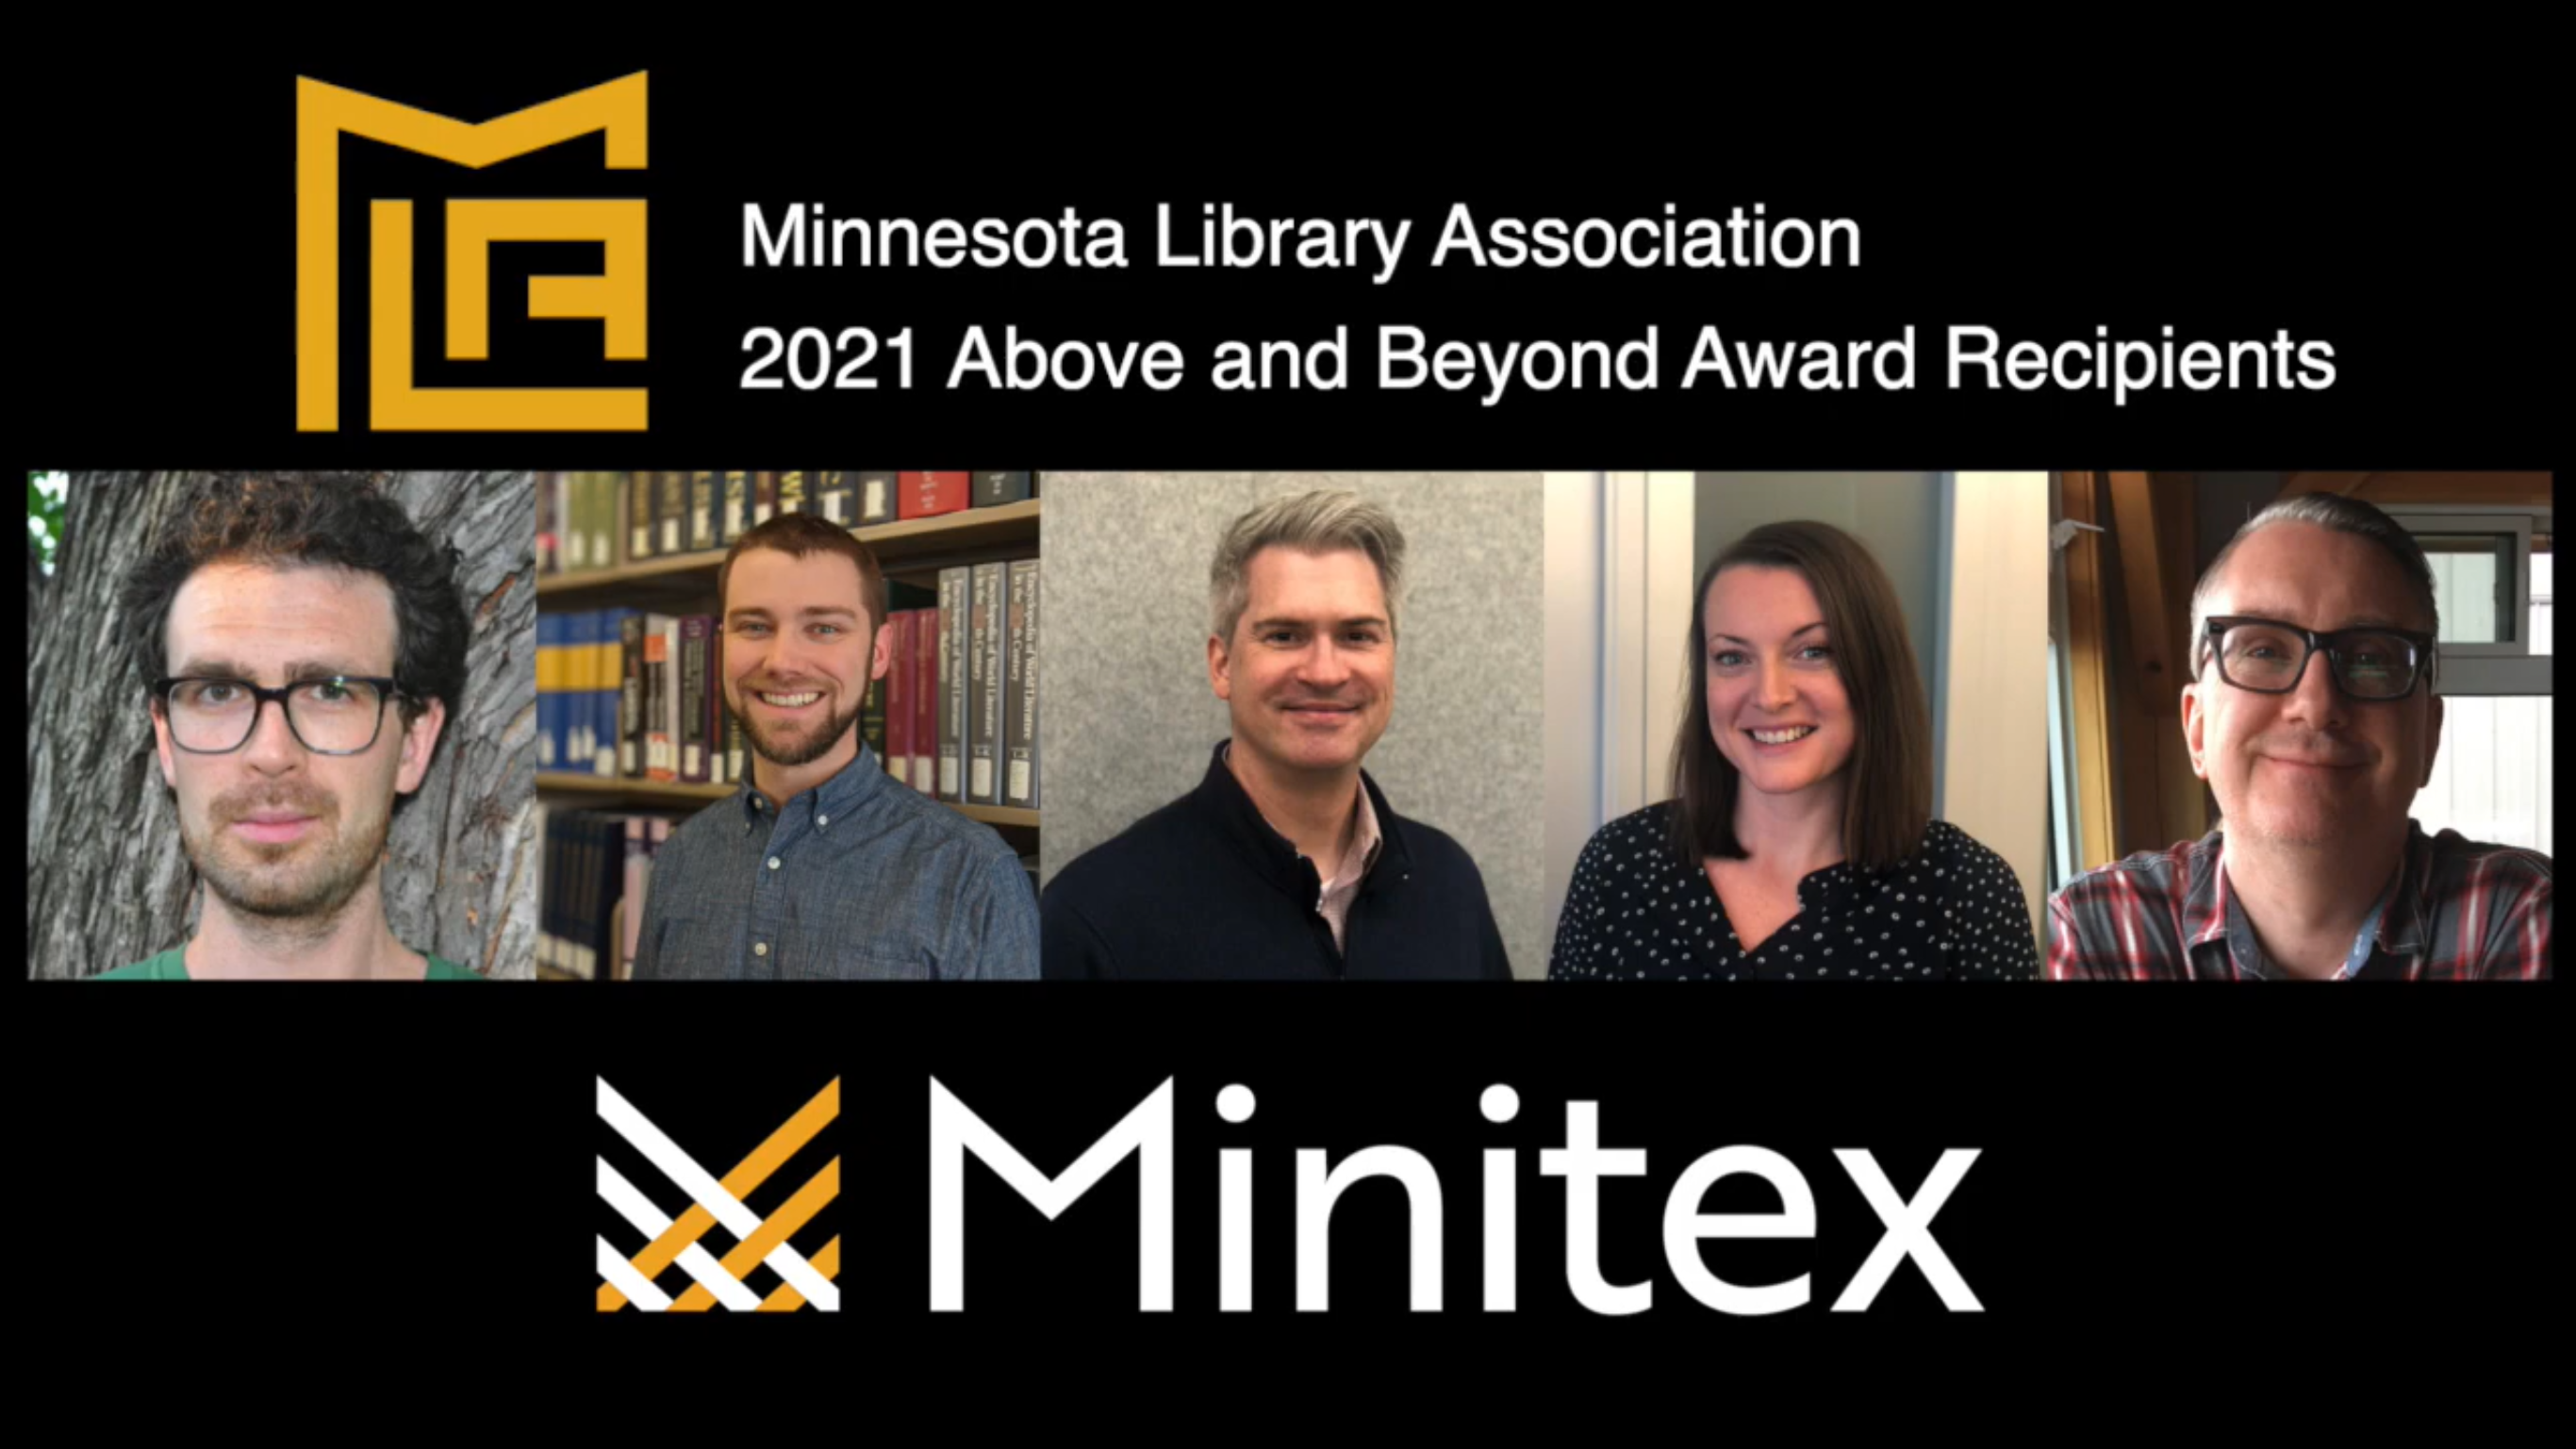 A photo of the five members of the Minitex IT department with the words "Minnesota Library Association 2021 Above and Beyond Award Recipients"